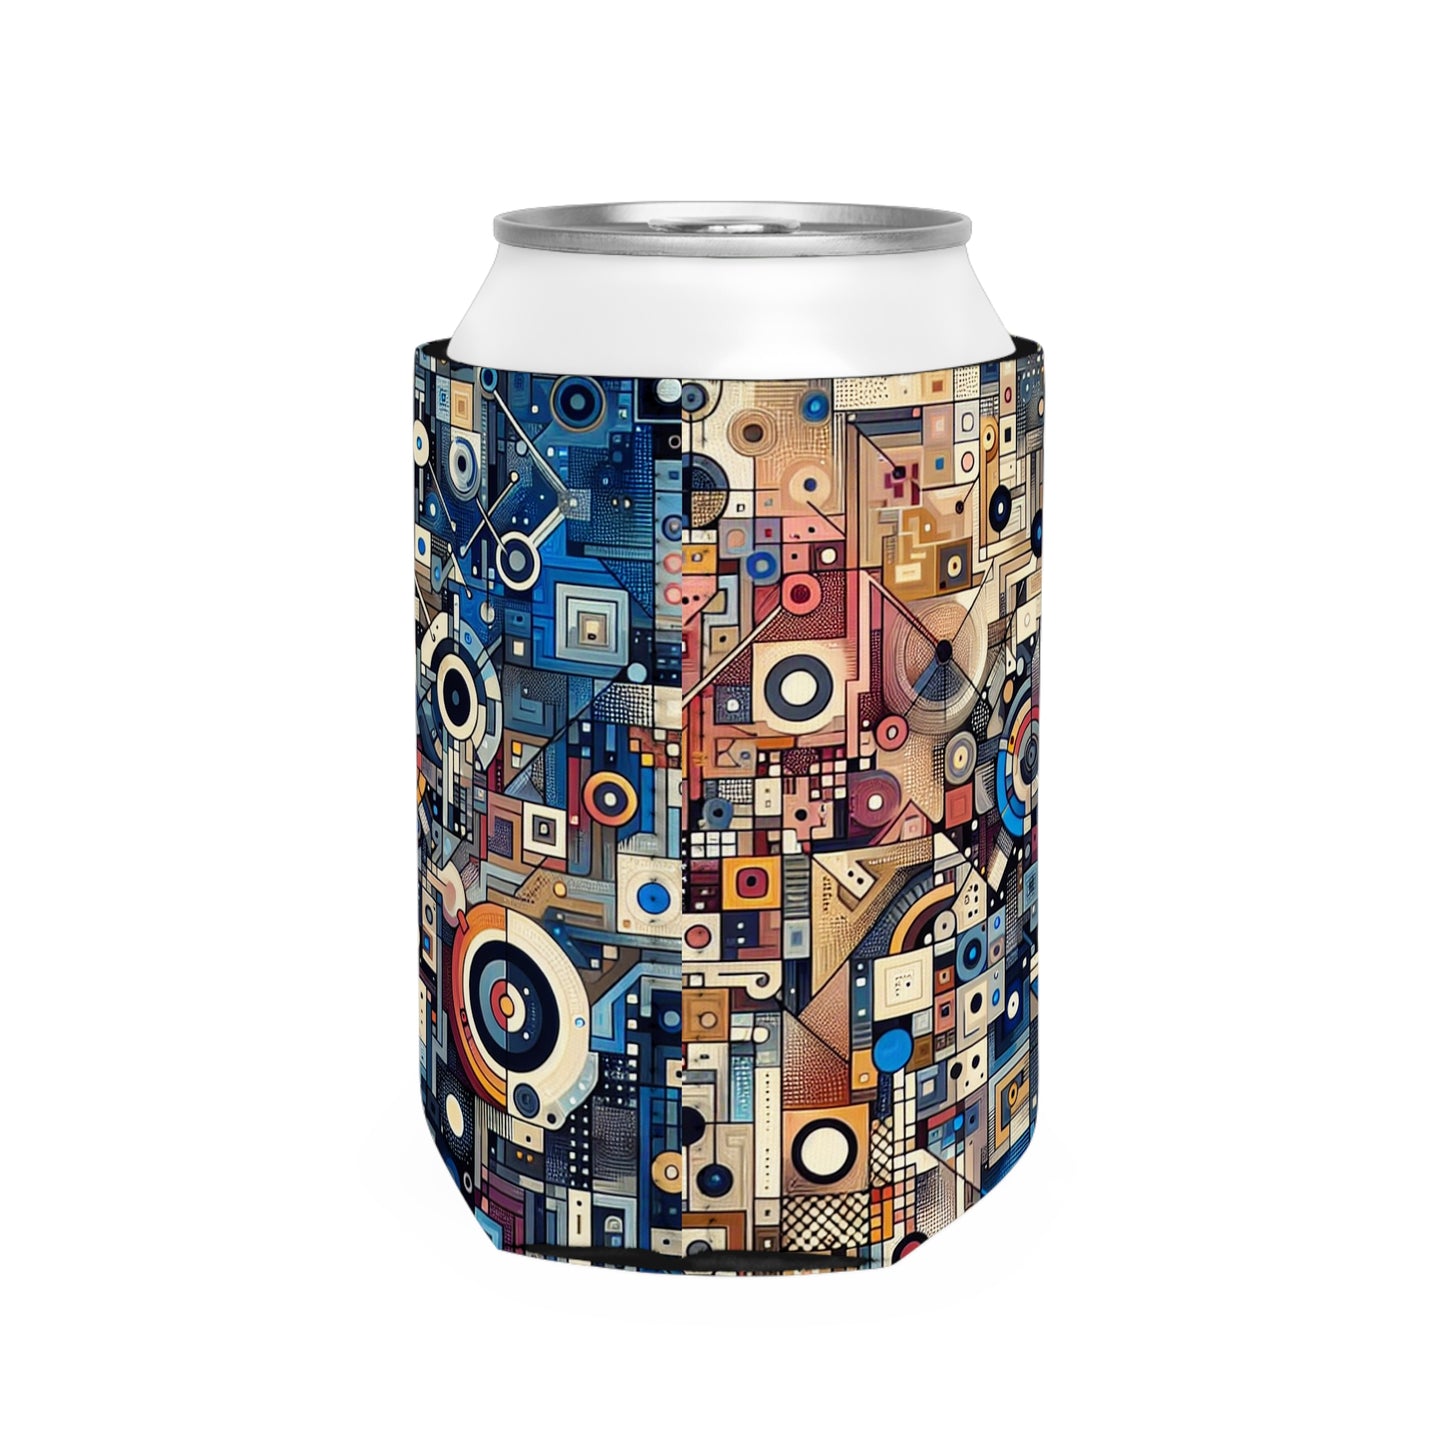 "Connected Hearts: Love in the Digital Age" - The Alien Can Cooler Sleeve Conceptual Art